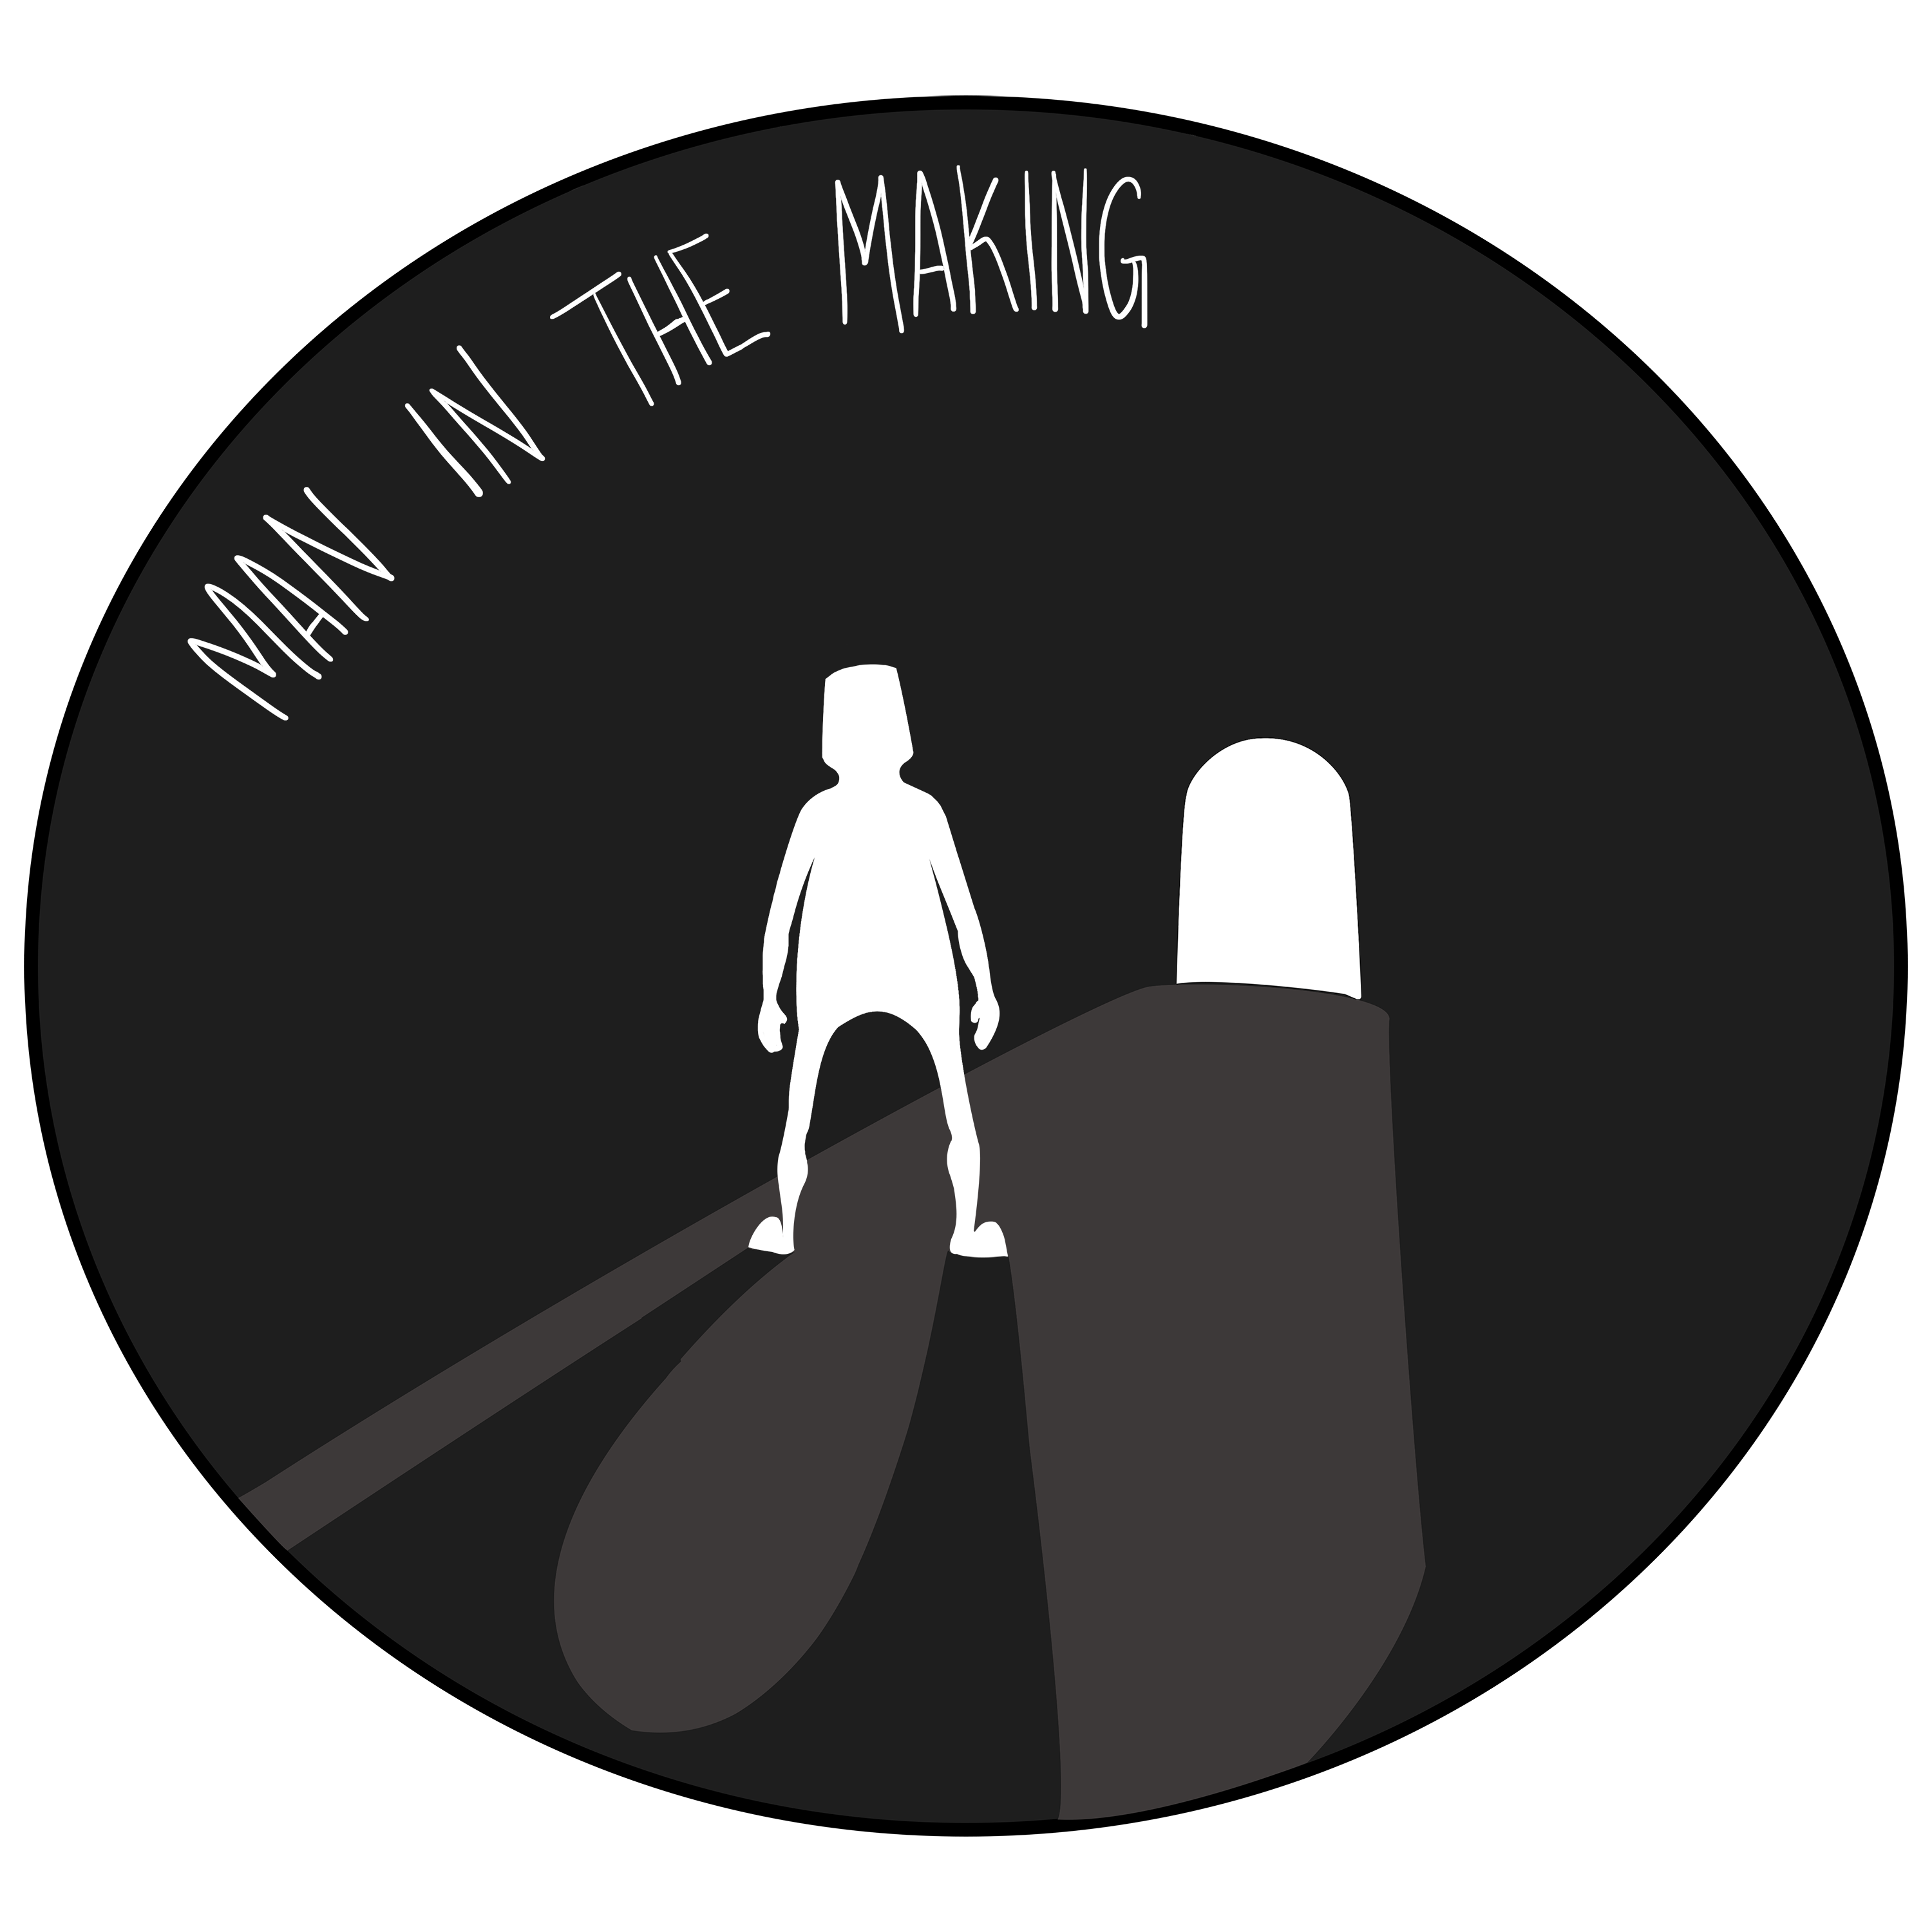 Show artwork for Man in the Making